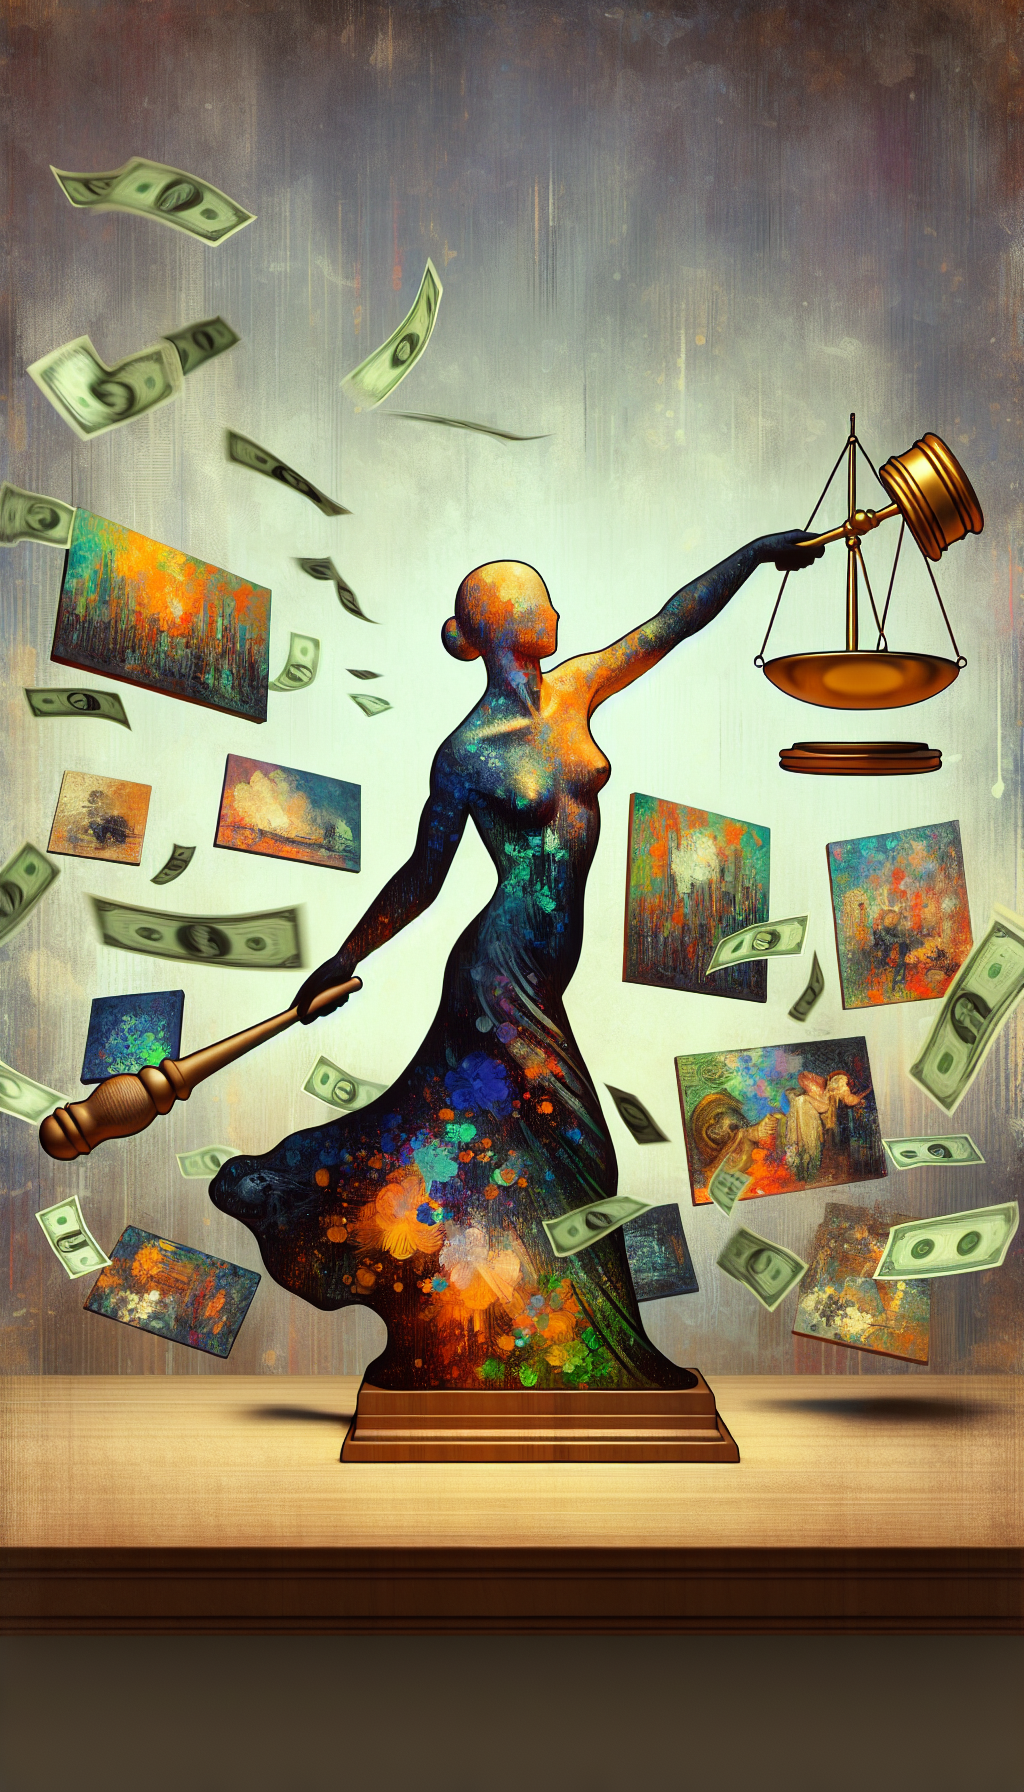 An illustration features a classical Bibbs' figure gracefully holding up a translucent, golden auctioneer's gavel, surrounded by semi-abstract, miniature versions of his signature colorful artworks as fluttering dollar bills. The figure's pose insinuates a scale, balancing art and currency, symbolizing the value assessment in Bibbs' art market, while the contrasting artistic styles around her embody the varying appeal to different collectors.